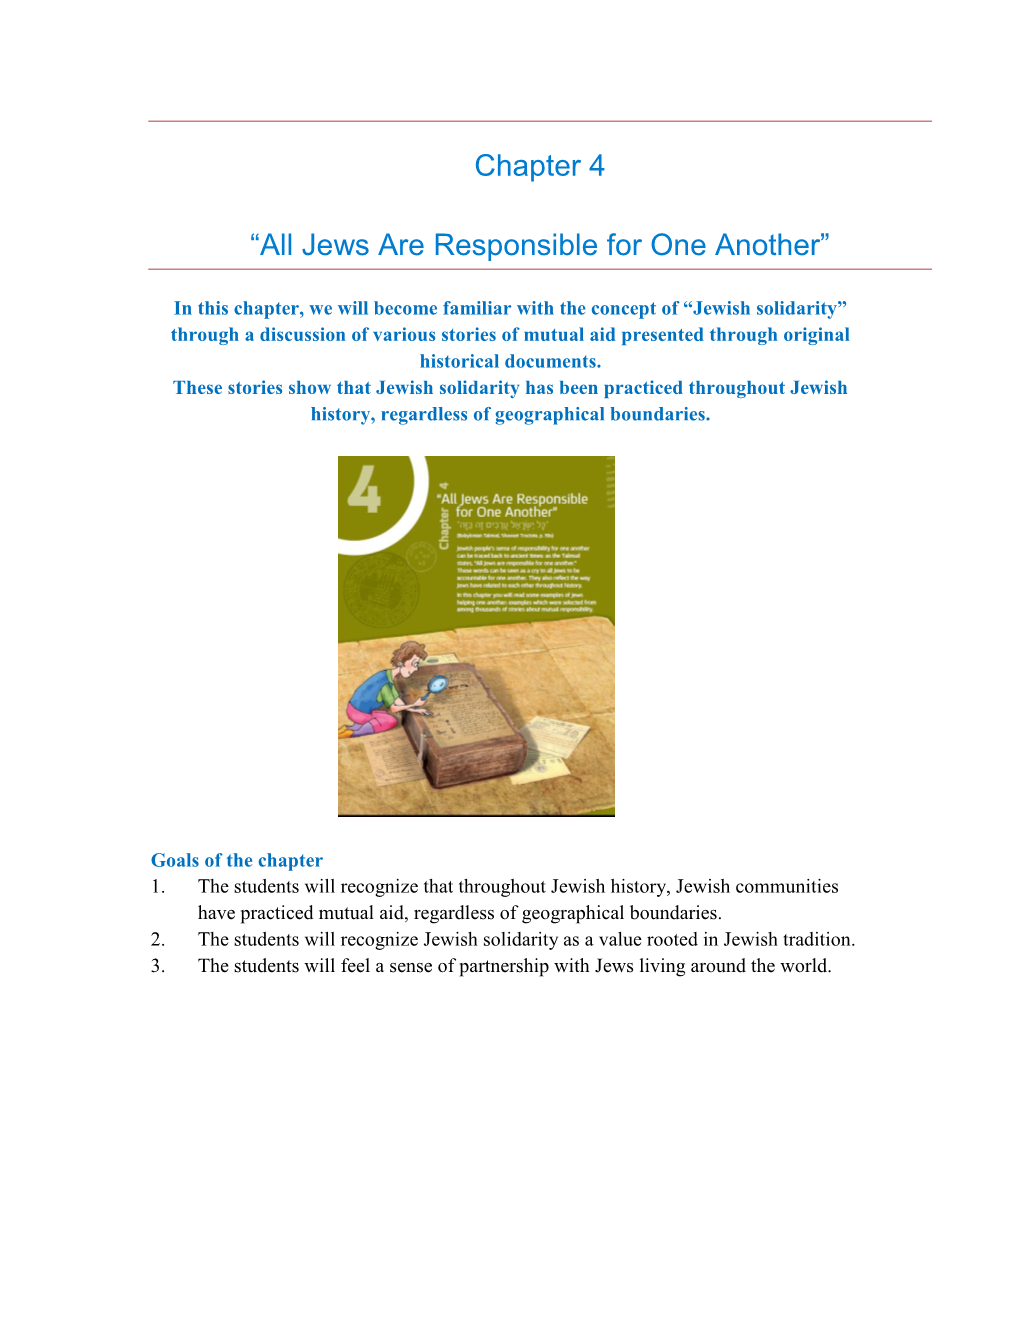 Chapter 4 “All Jews Are Responsible for One Another”